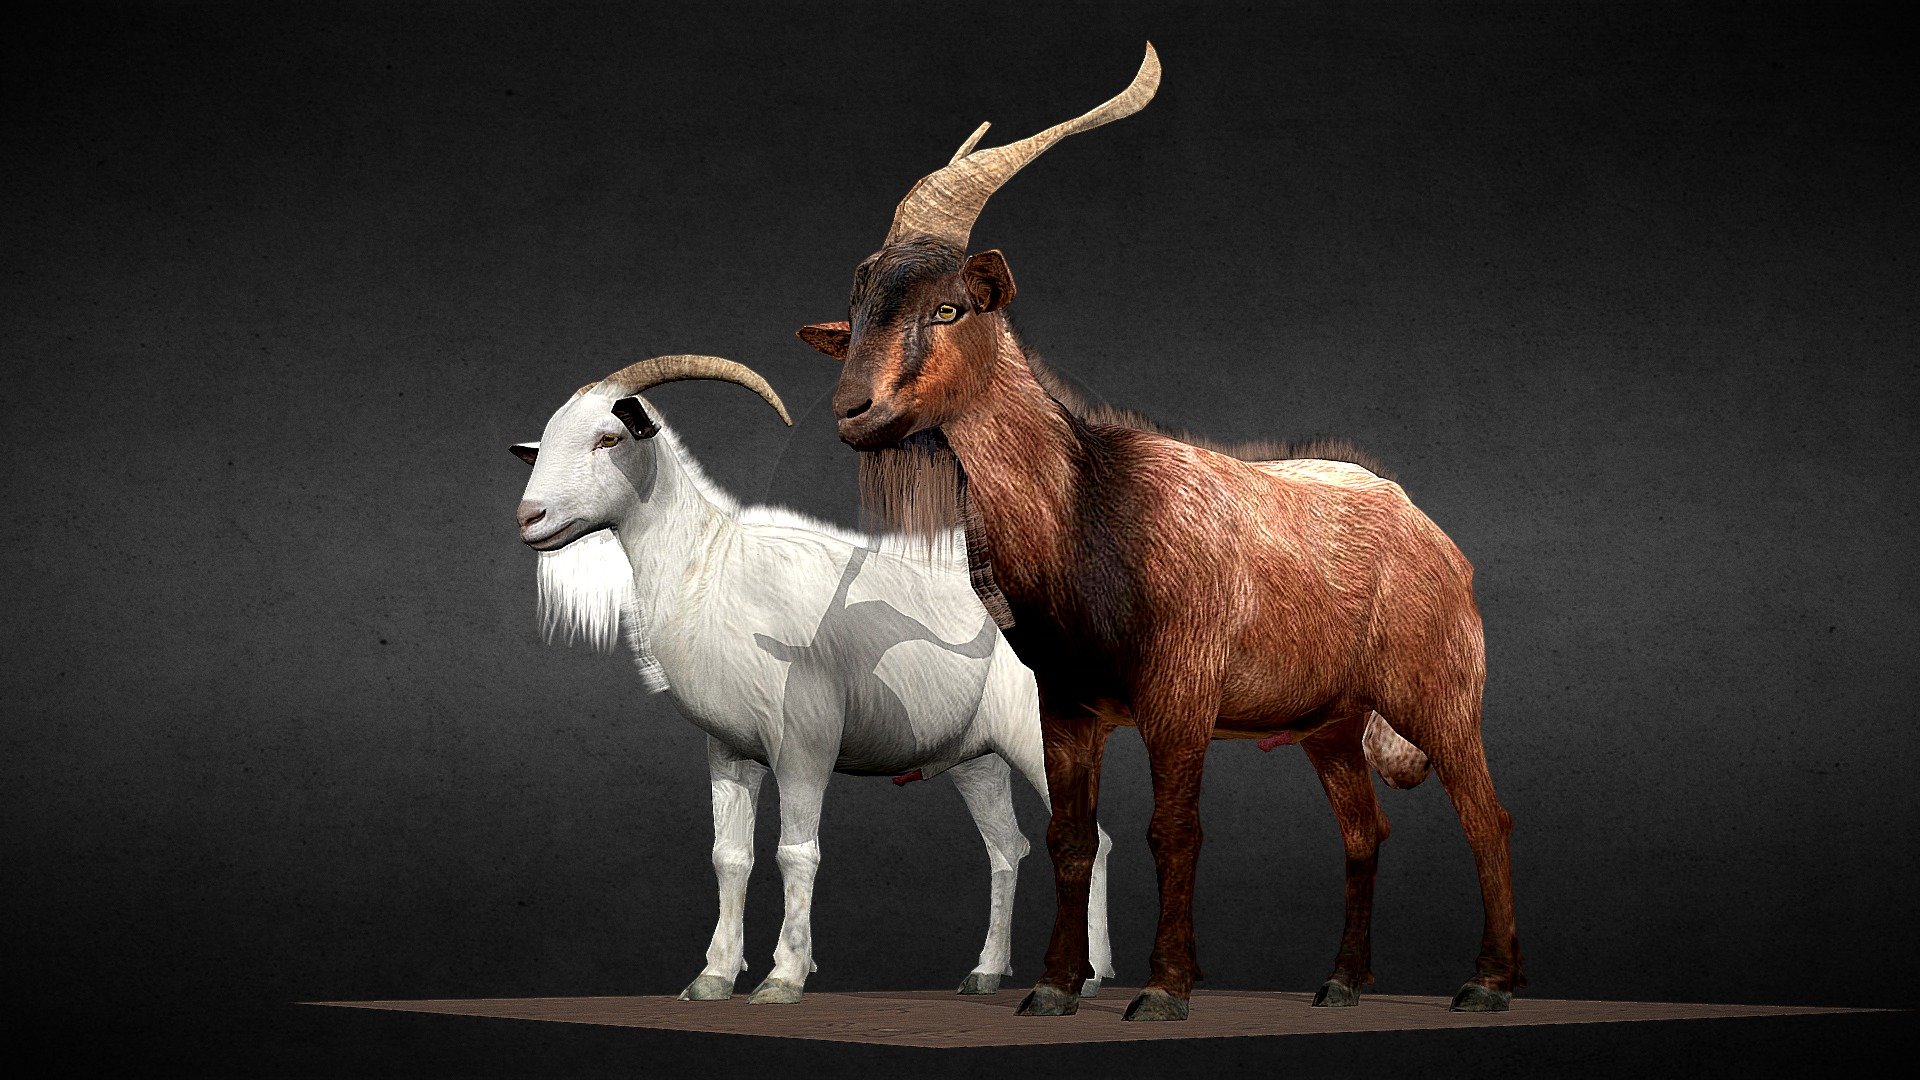 Anyone needs it or more than it, do not hesitate to contact me at ducdm69@gmail.com or ducdm69@hotmail.com - Male Goats - 3D model by Đức Đào Minh (@dmd_hn) 3d model